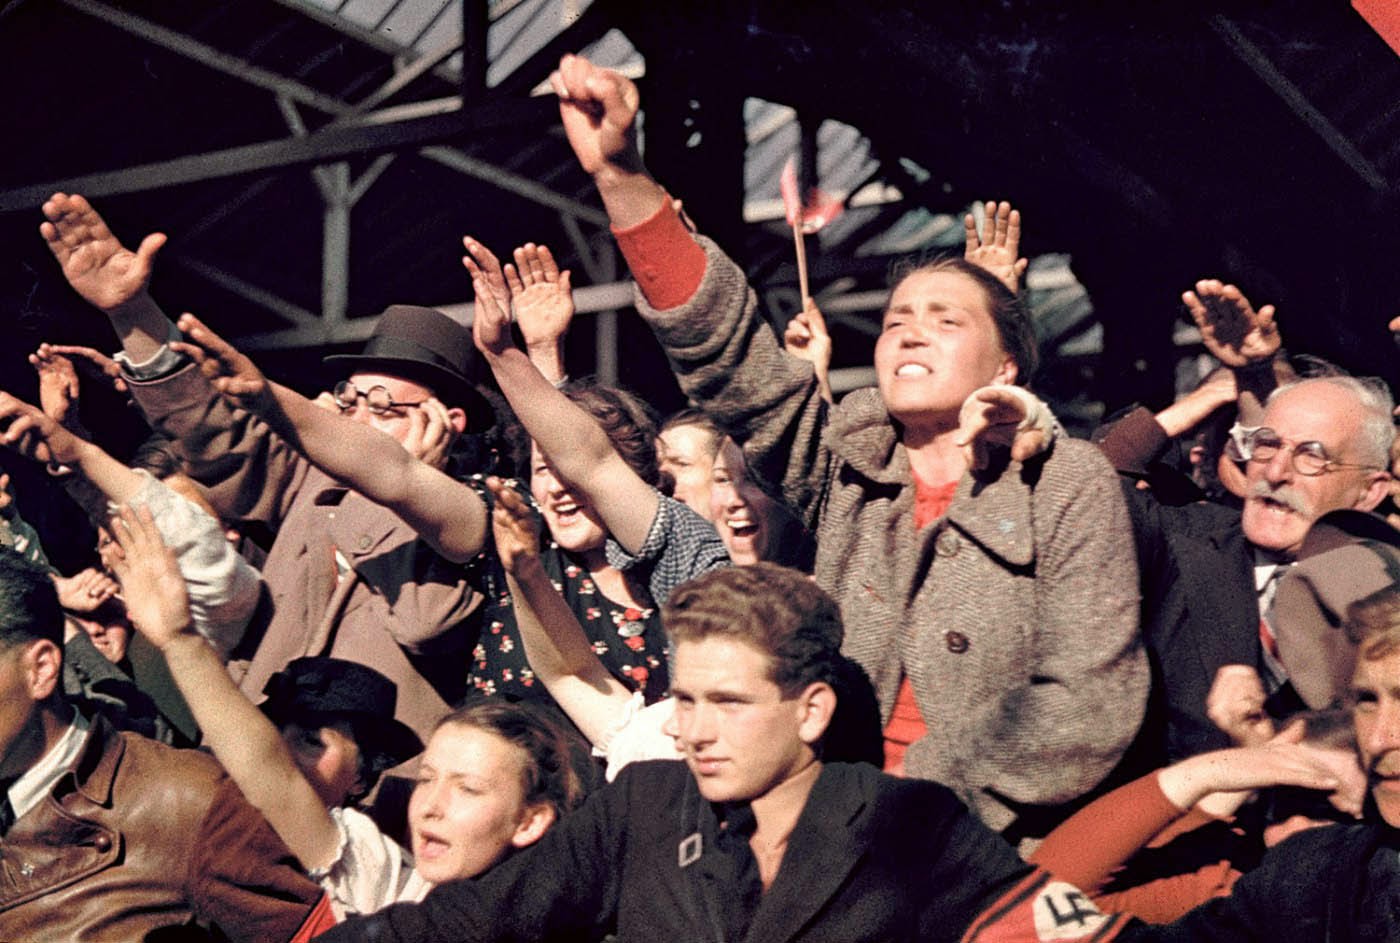 Crowds cheering Adolf Hitler’s campaign to unite Austria and Germany, 1938.